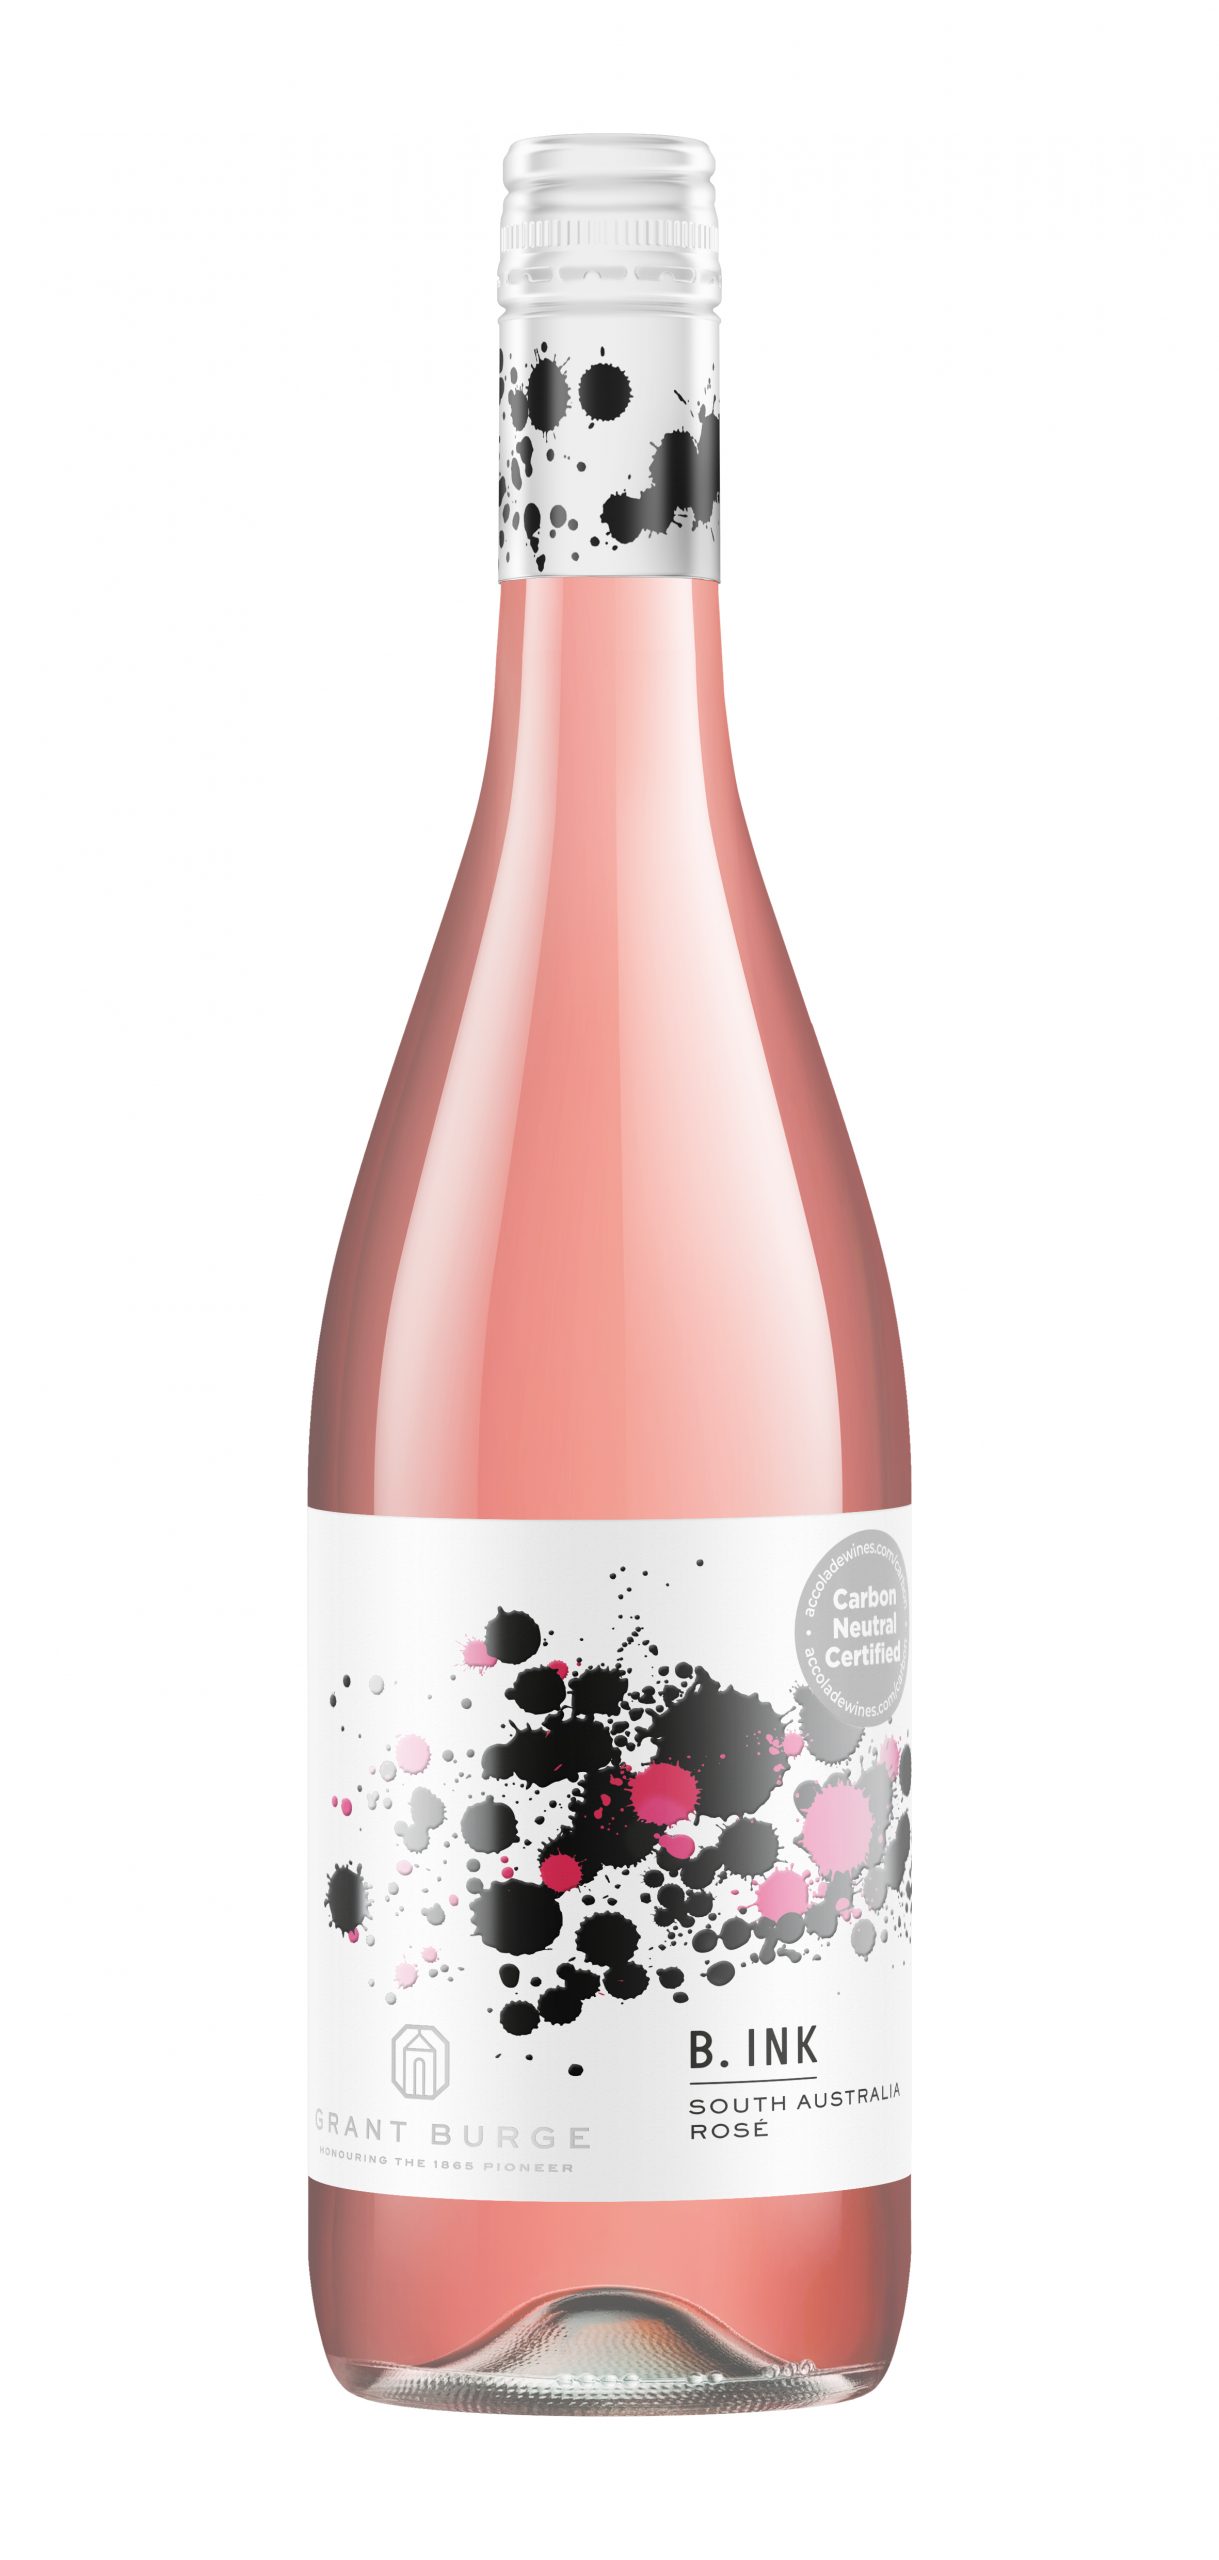 Accolade’s new B.INK Rosé and Chardonnay editions arrive